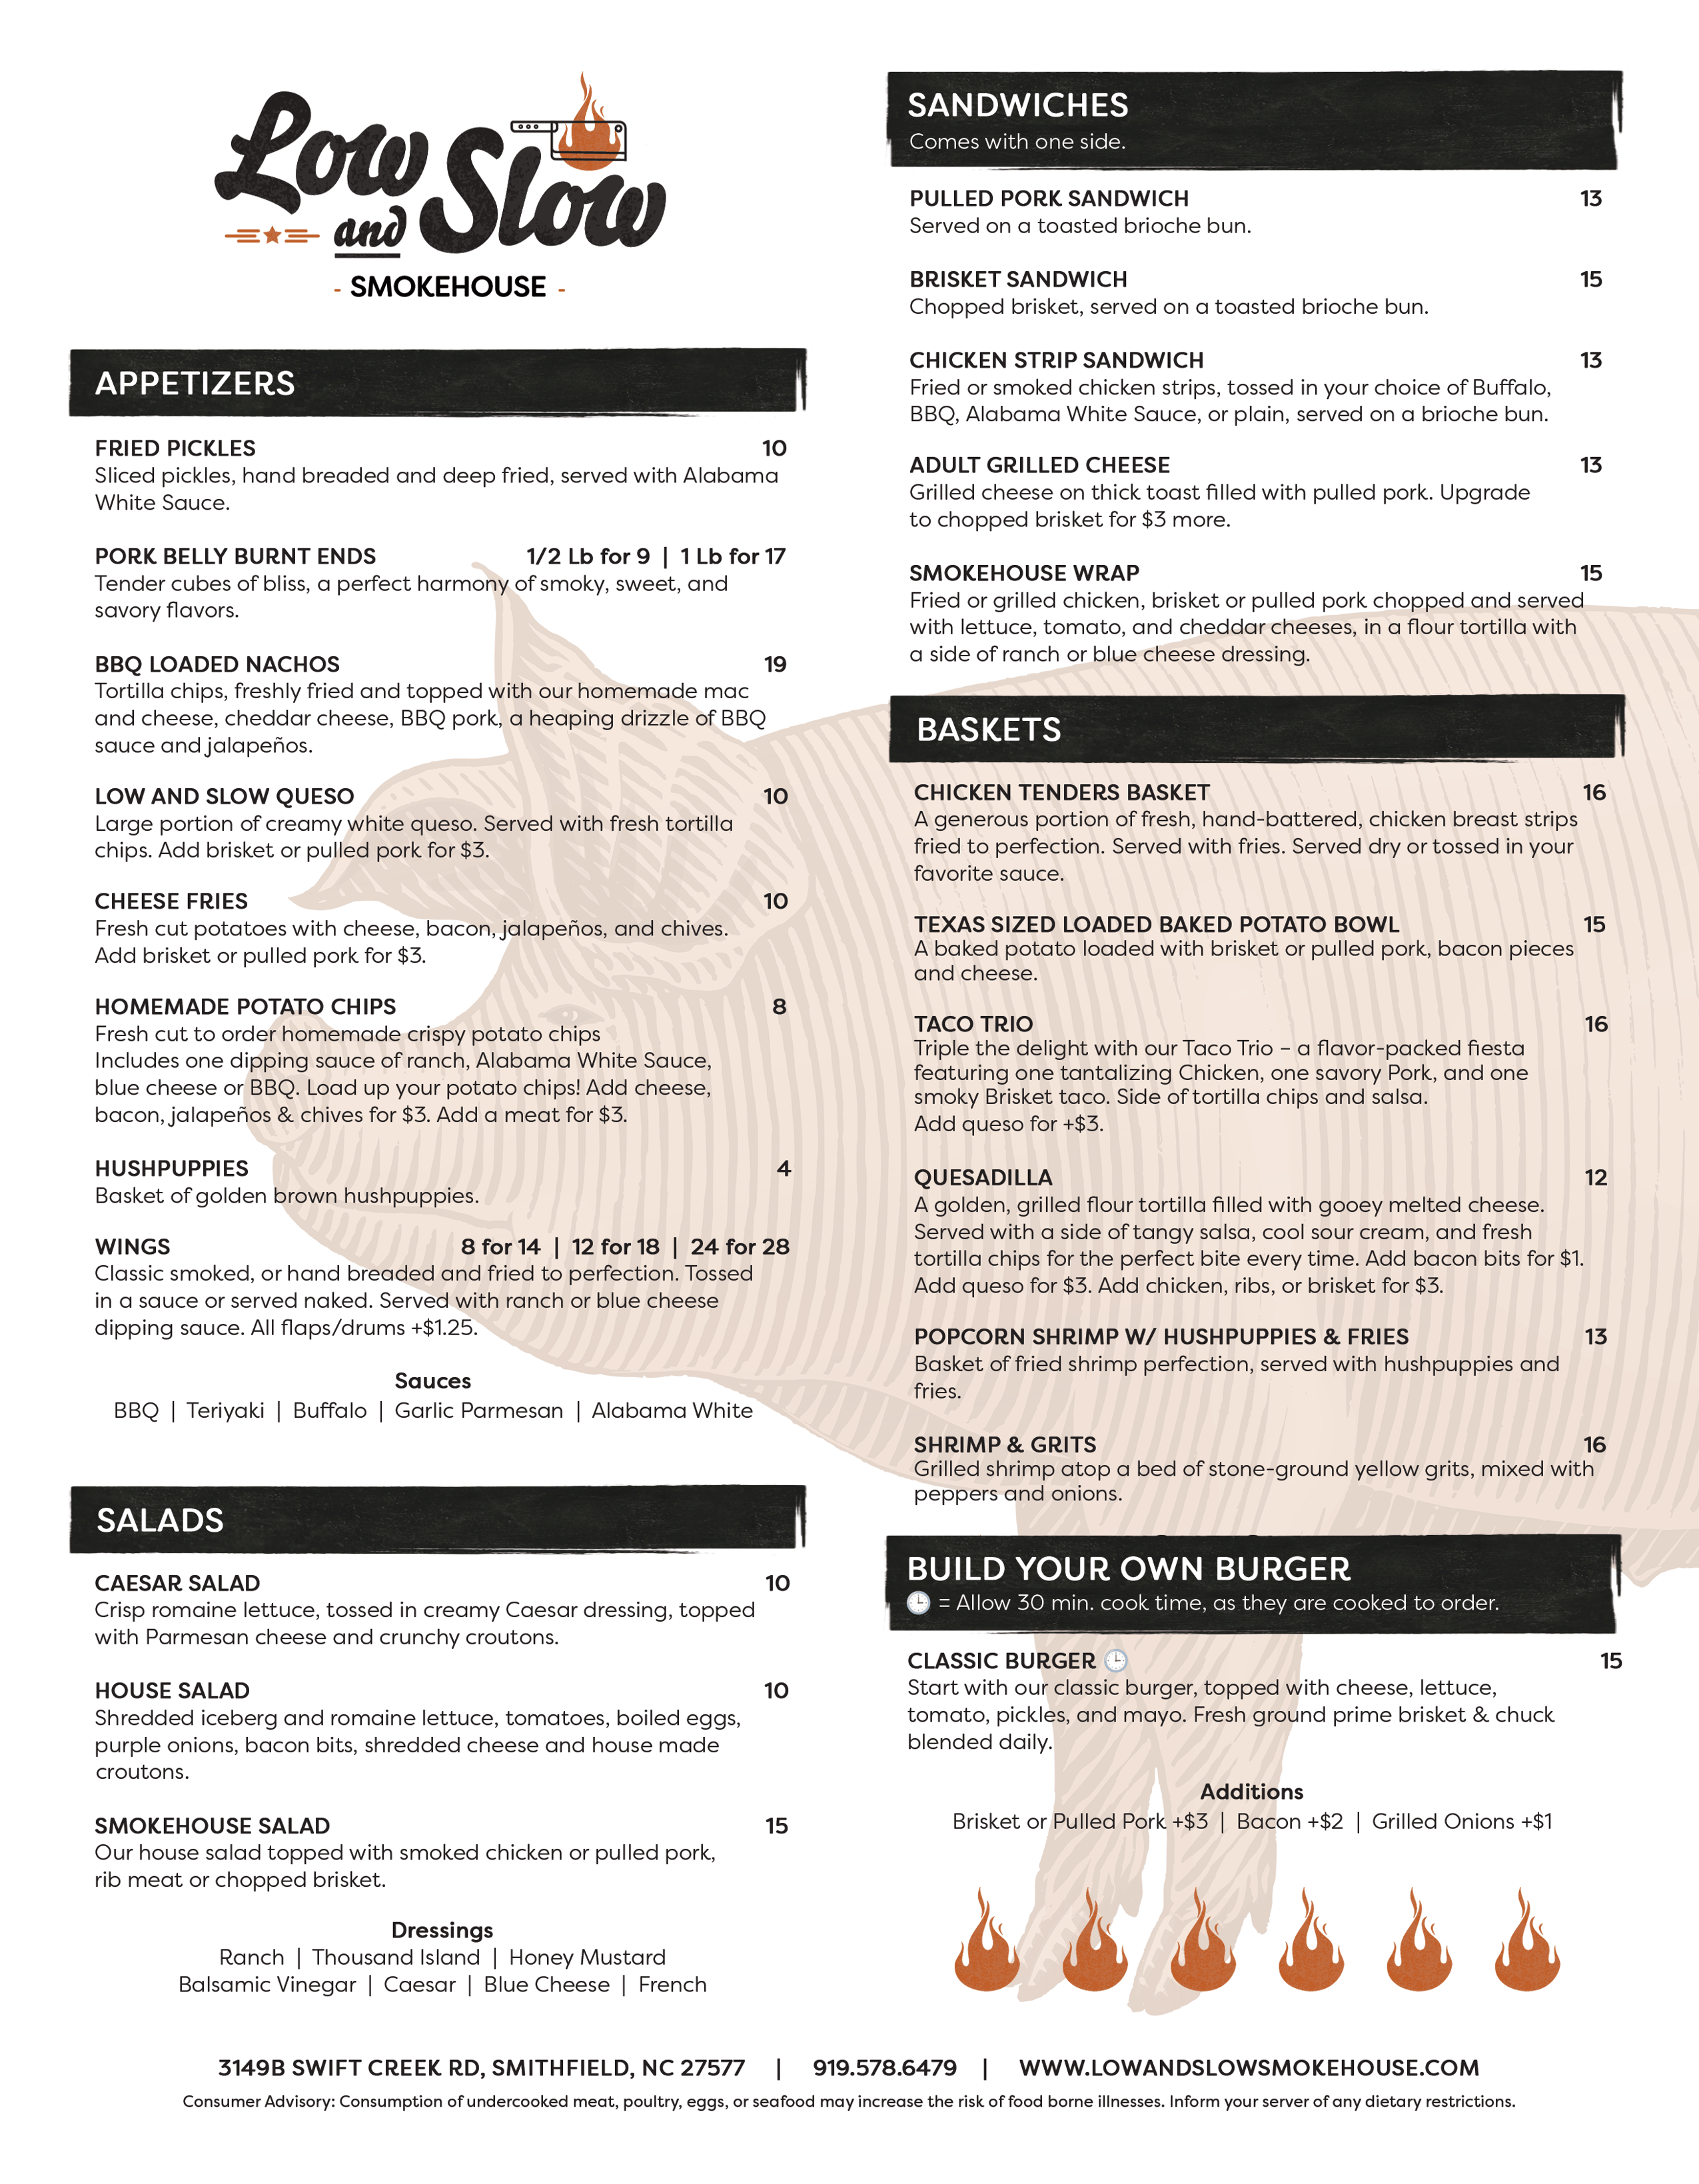 LOSL NC Menu v2.1.2 - Lunch and Dinner - Front